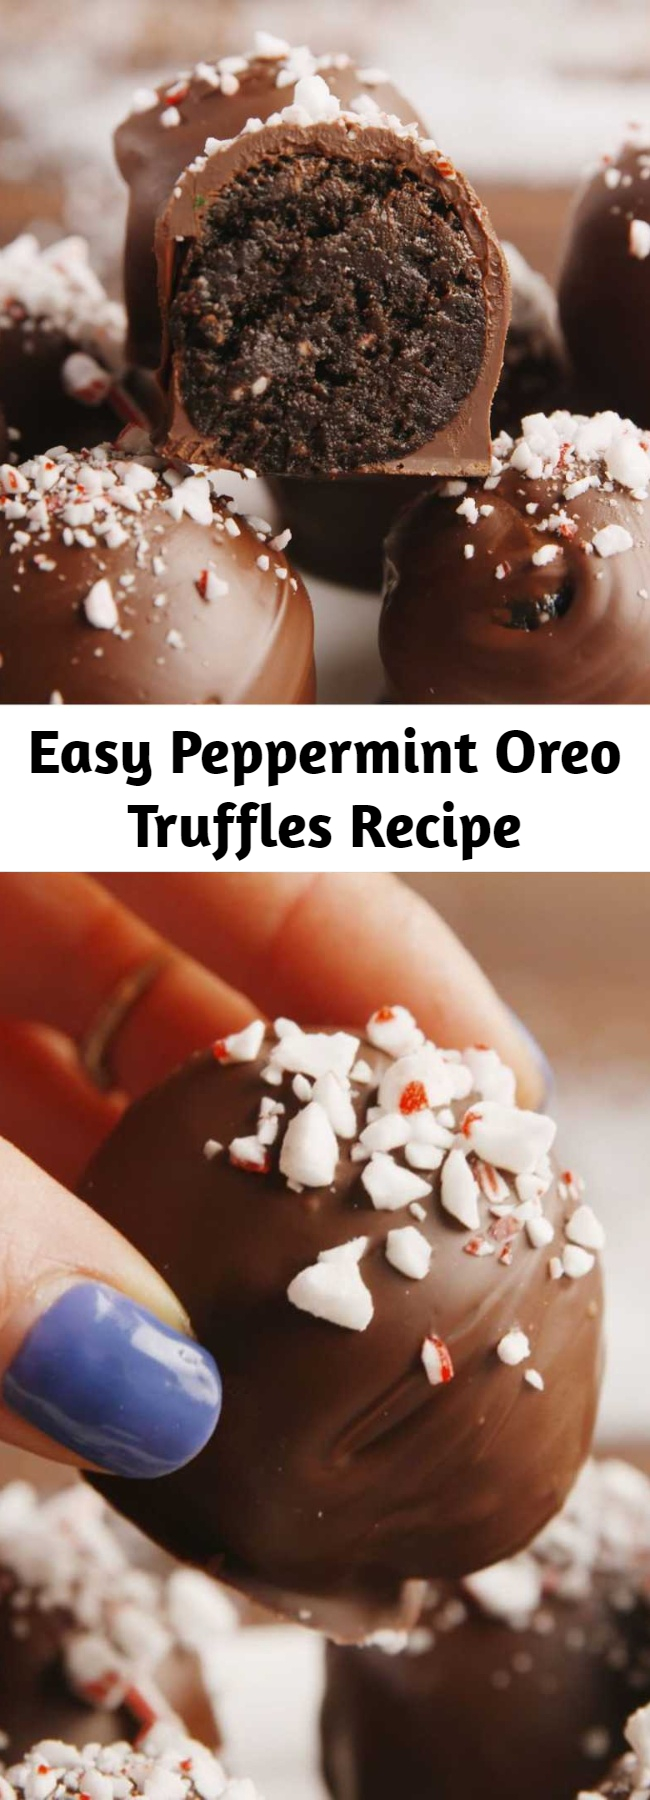 Easy Peppermint Oreo Truffles Recipe - How could something so simple be so good? #food #pastryporn #easyrecipe #recipe #holiday #christmas #ideas #wishlist #inspiration #home